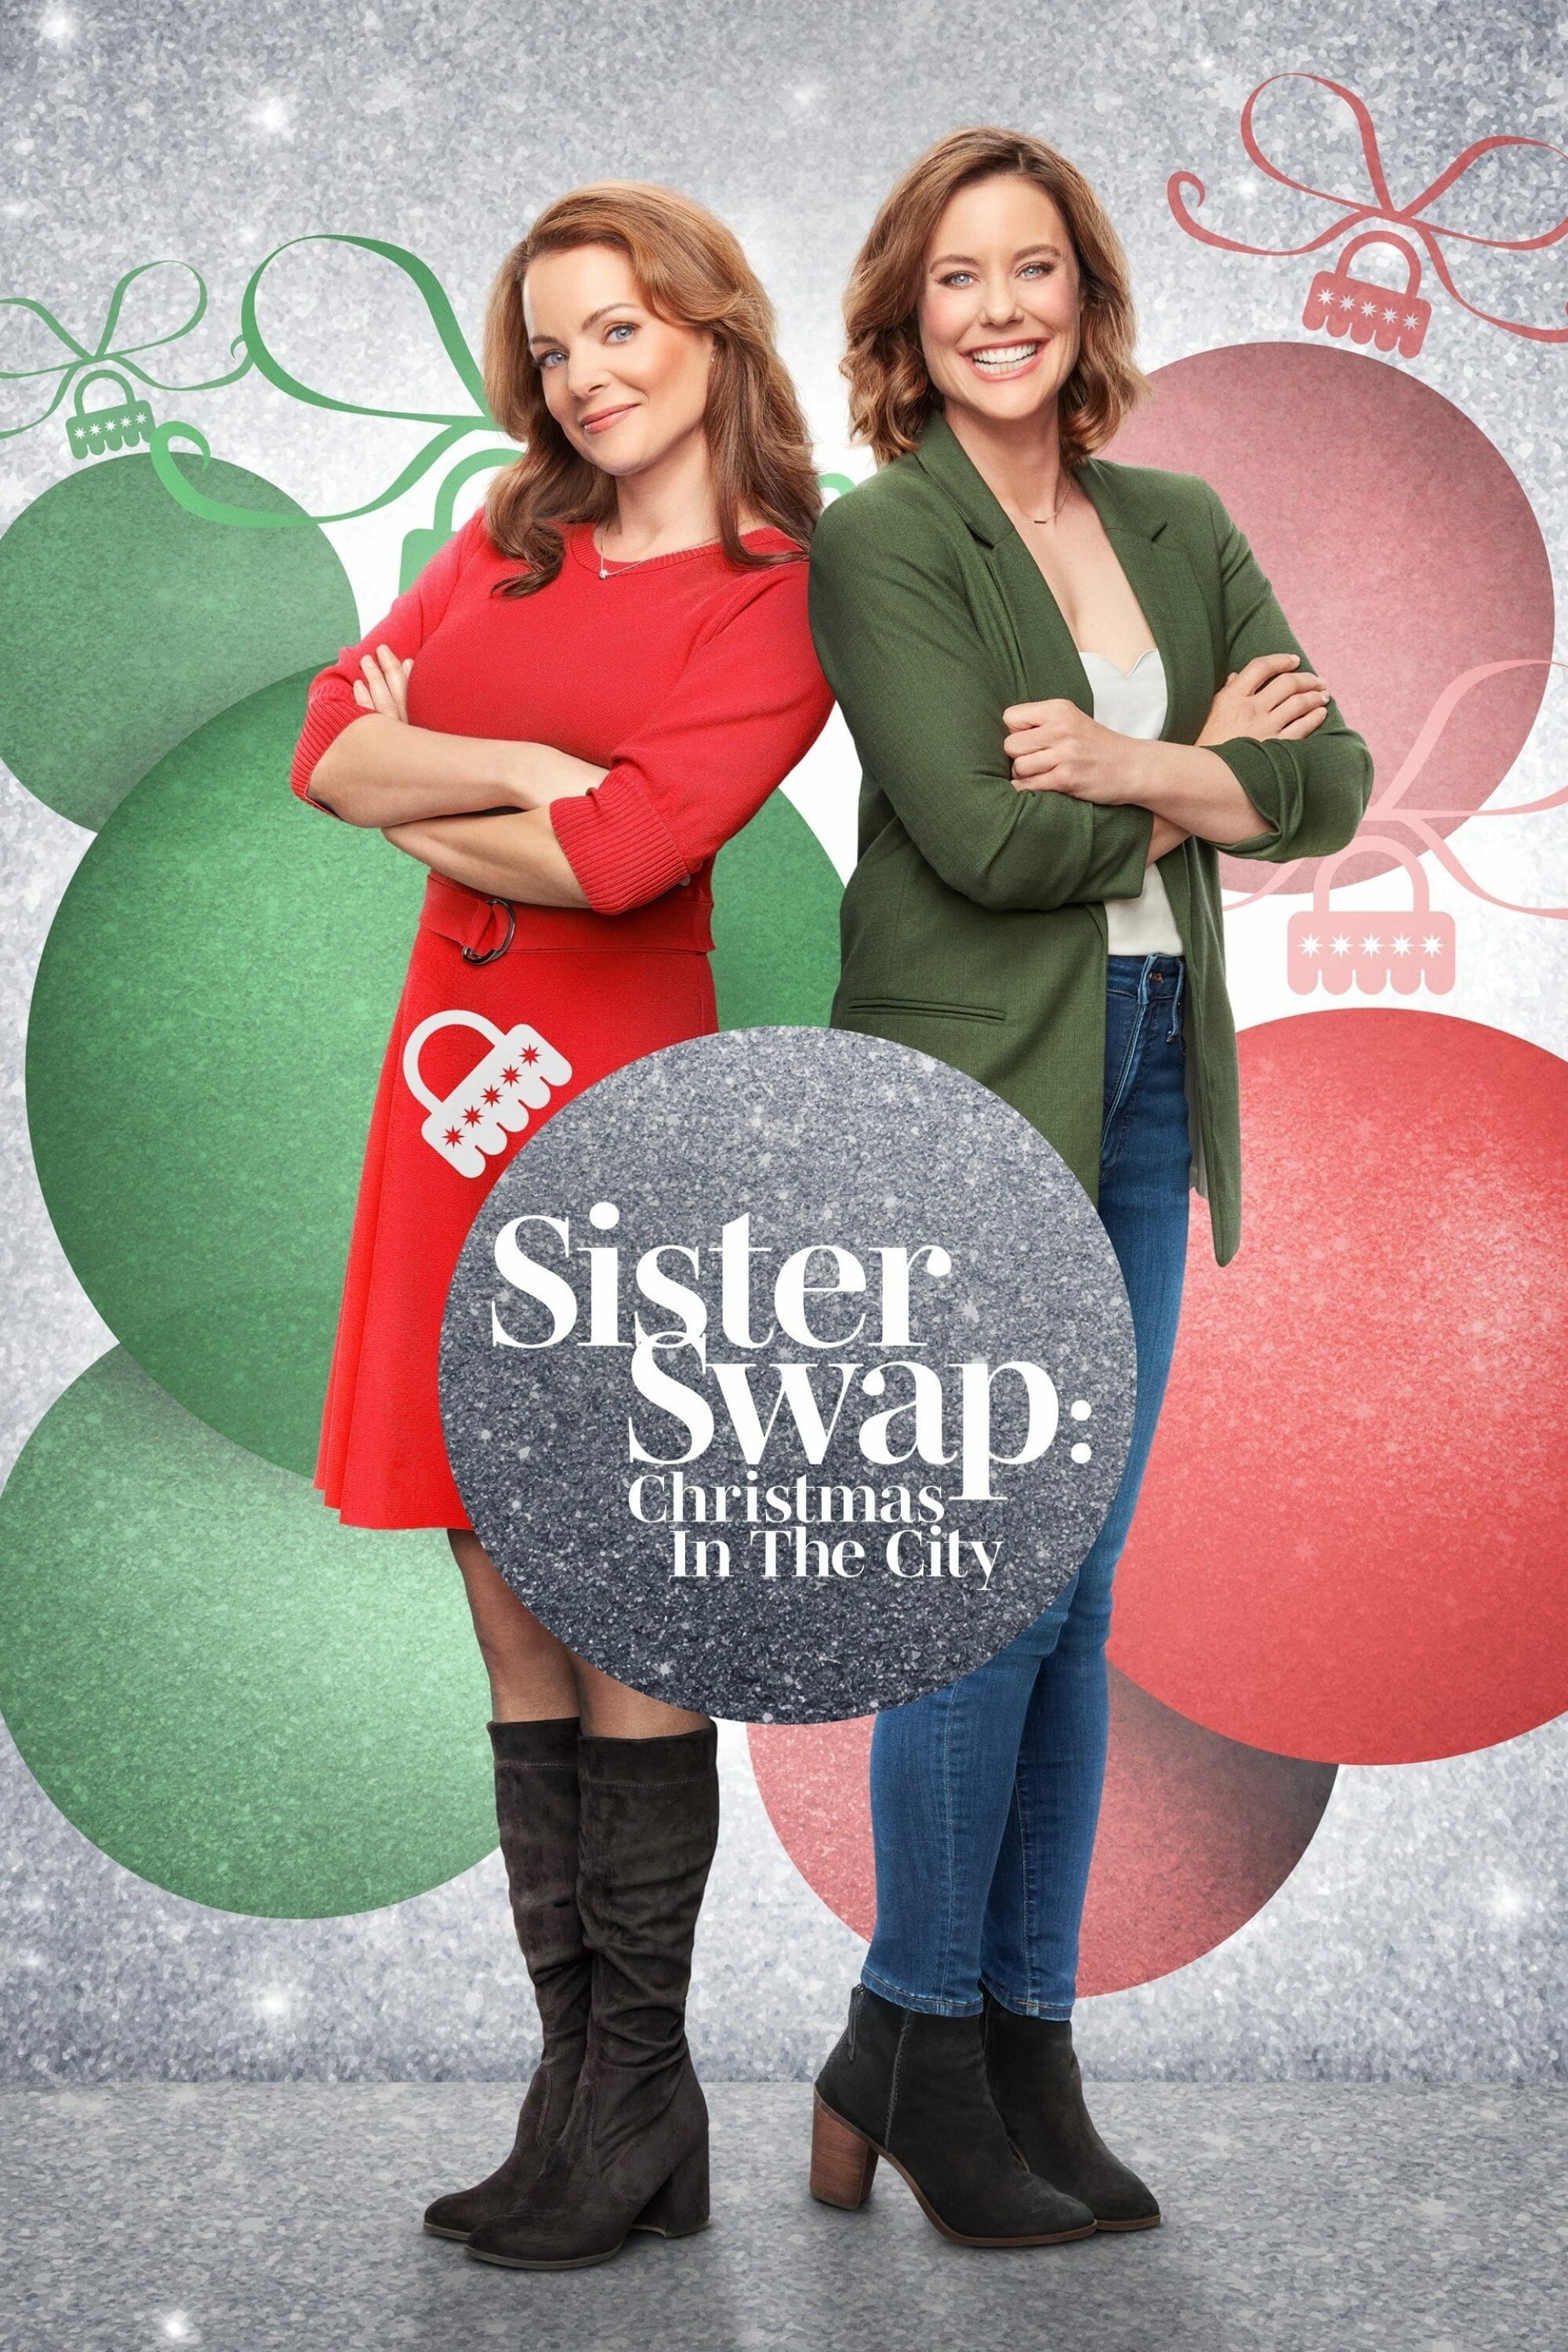 Sister Swap Christmas in the City 2021 1080p AMZN WEB-DL DDP5 1 H 264-WELP